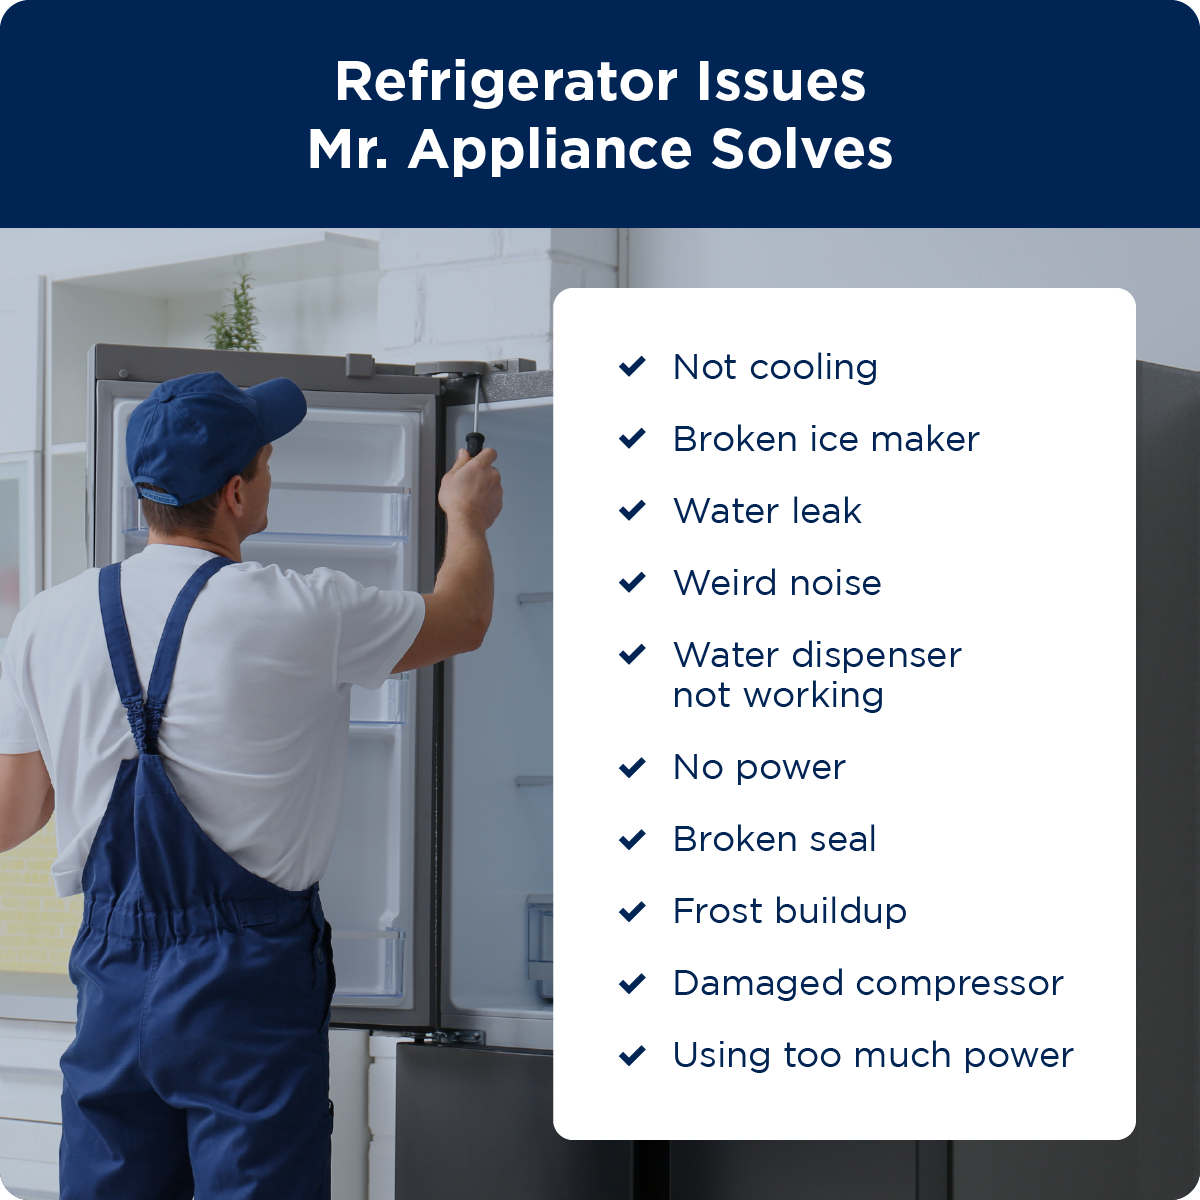 Common refrigerator problems solved by Mr. Appliance | refrigerator-issues-mr-appliance-solves